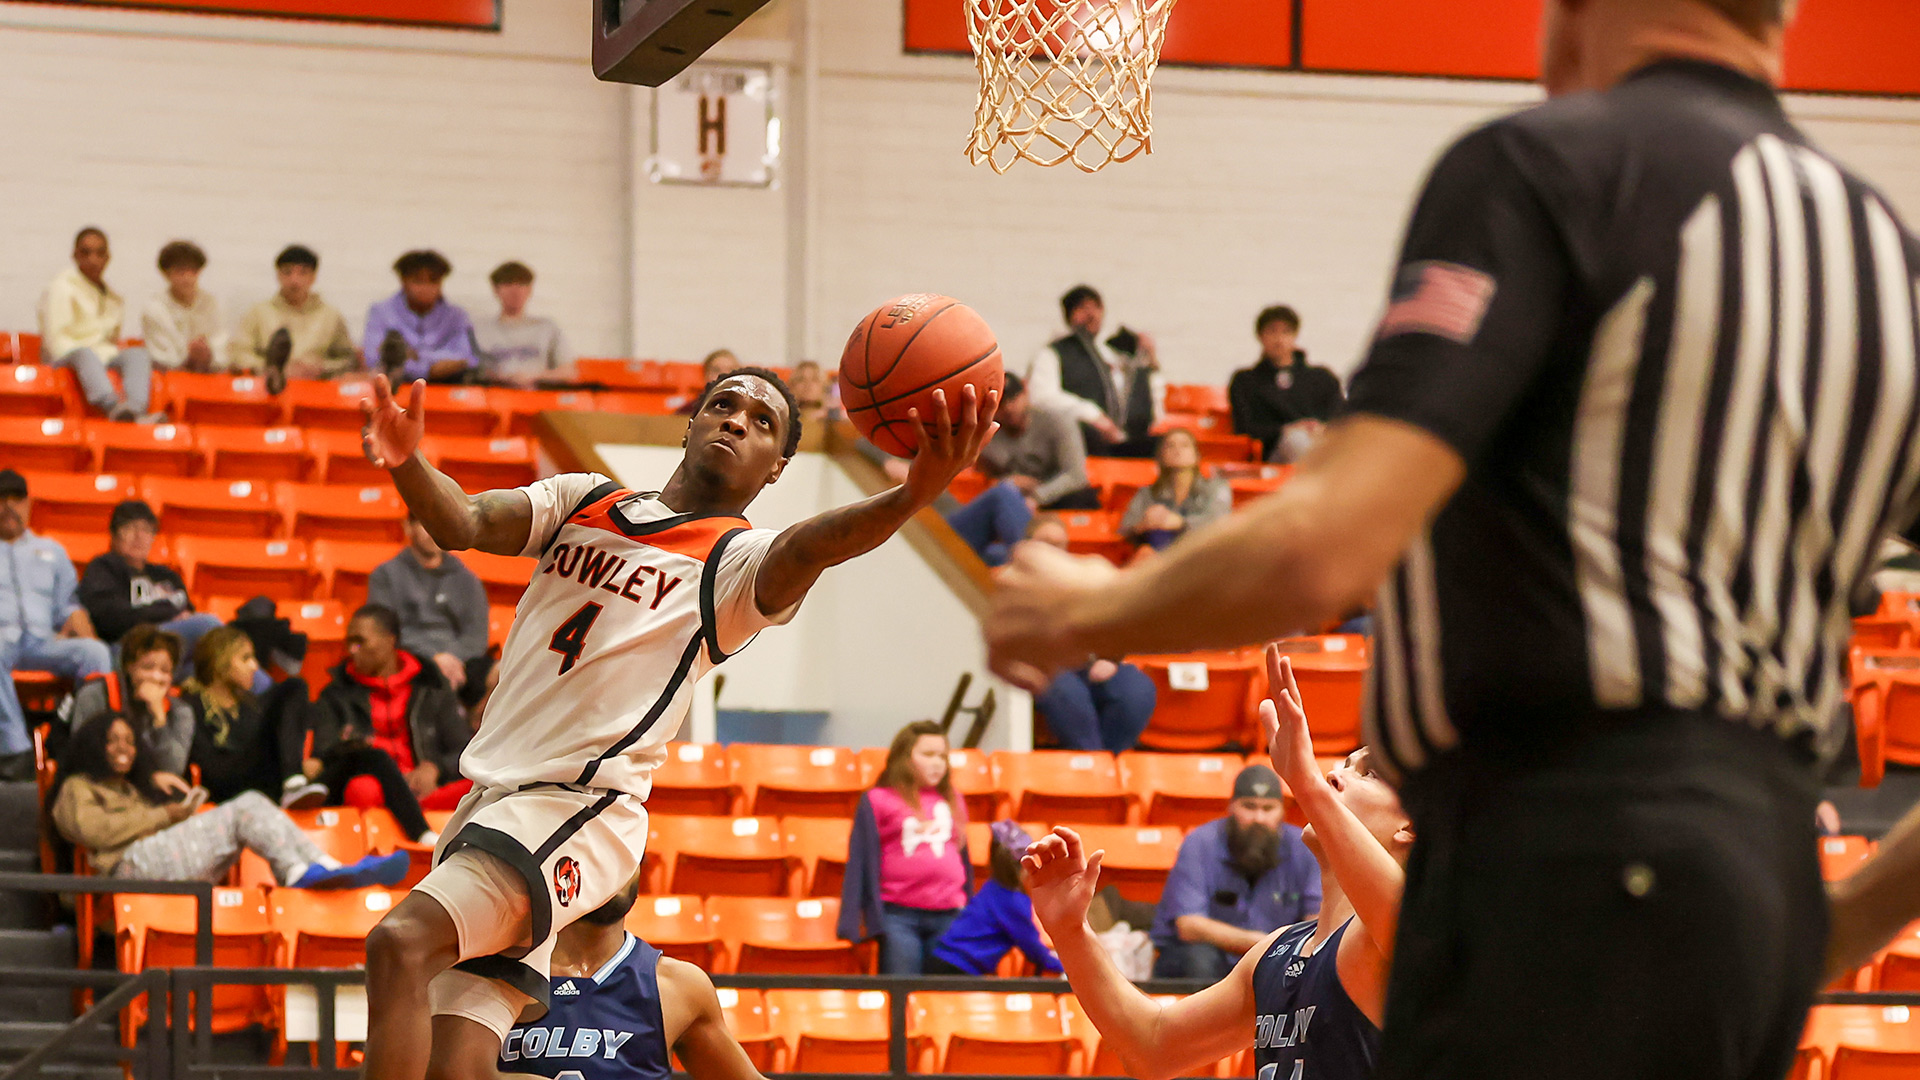 Cowley builds big lead, holds on for 83-78 road win